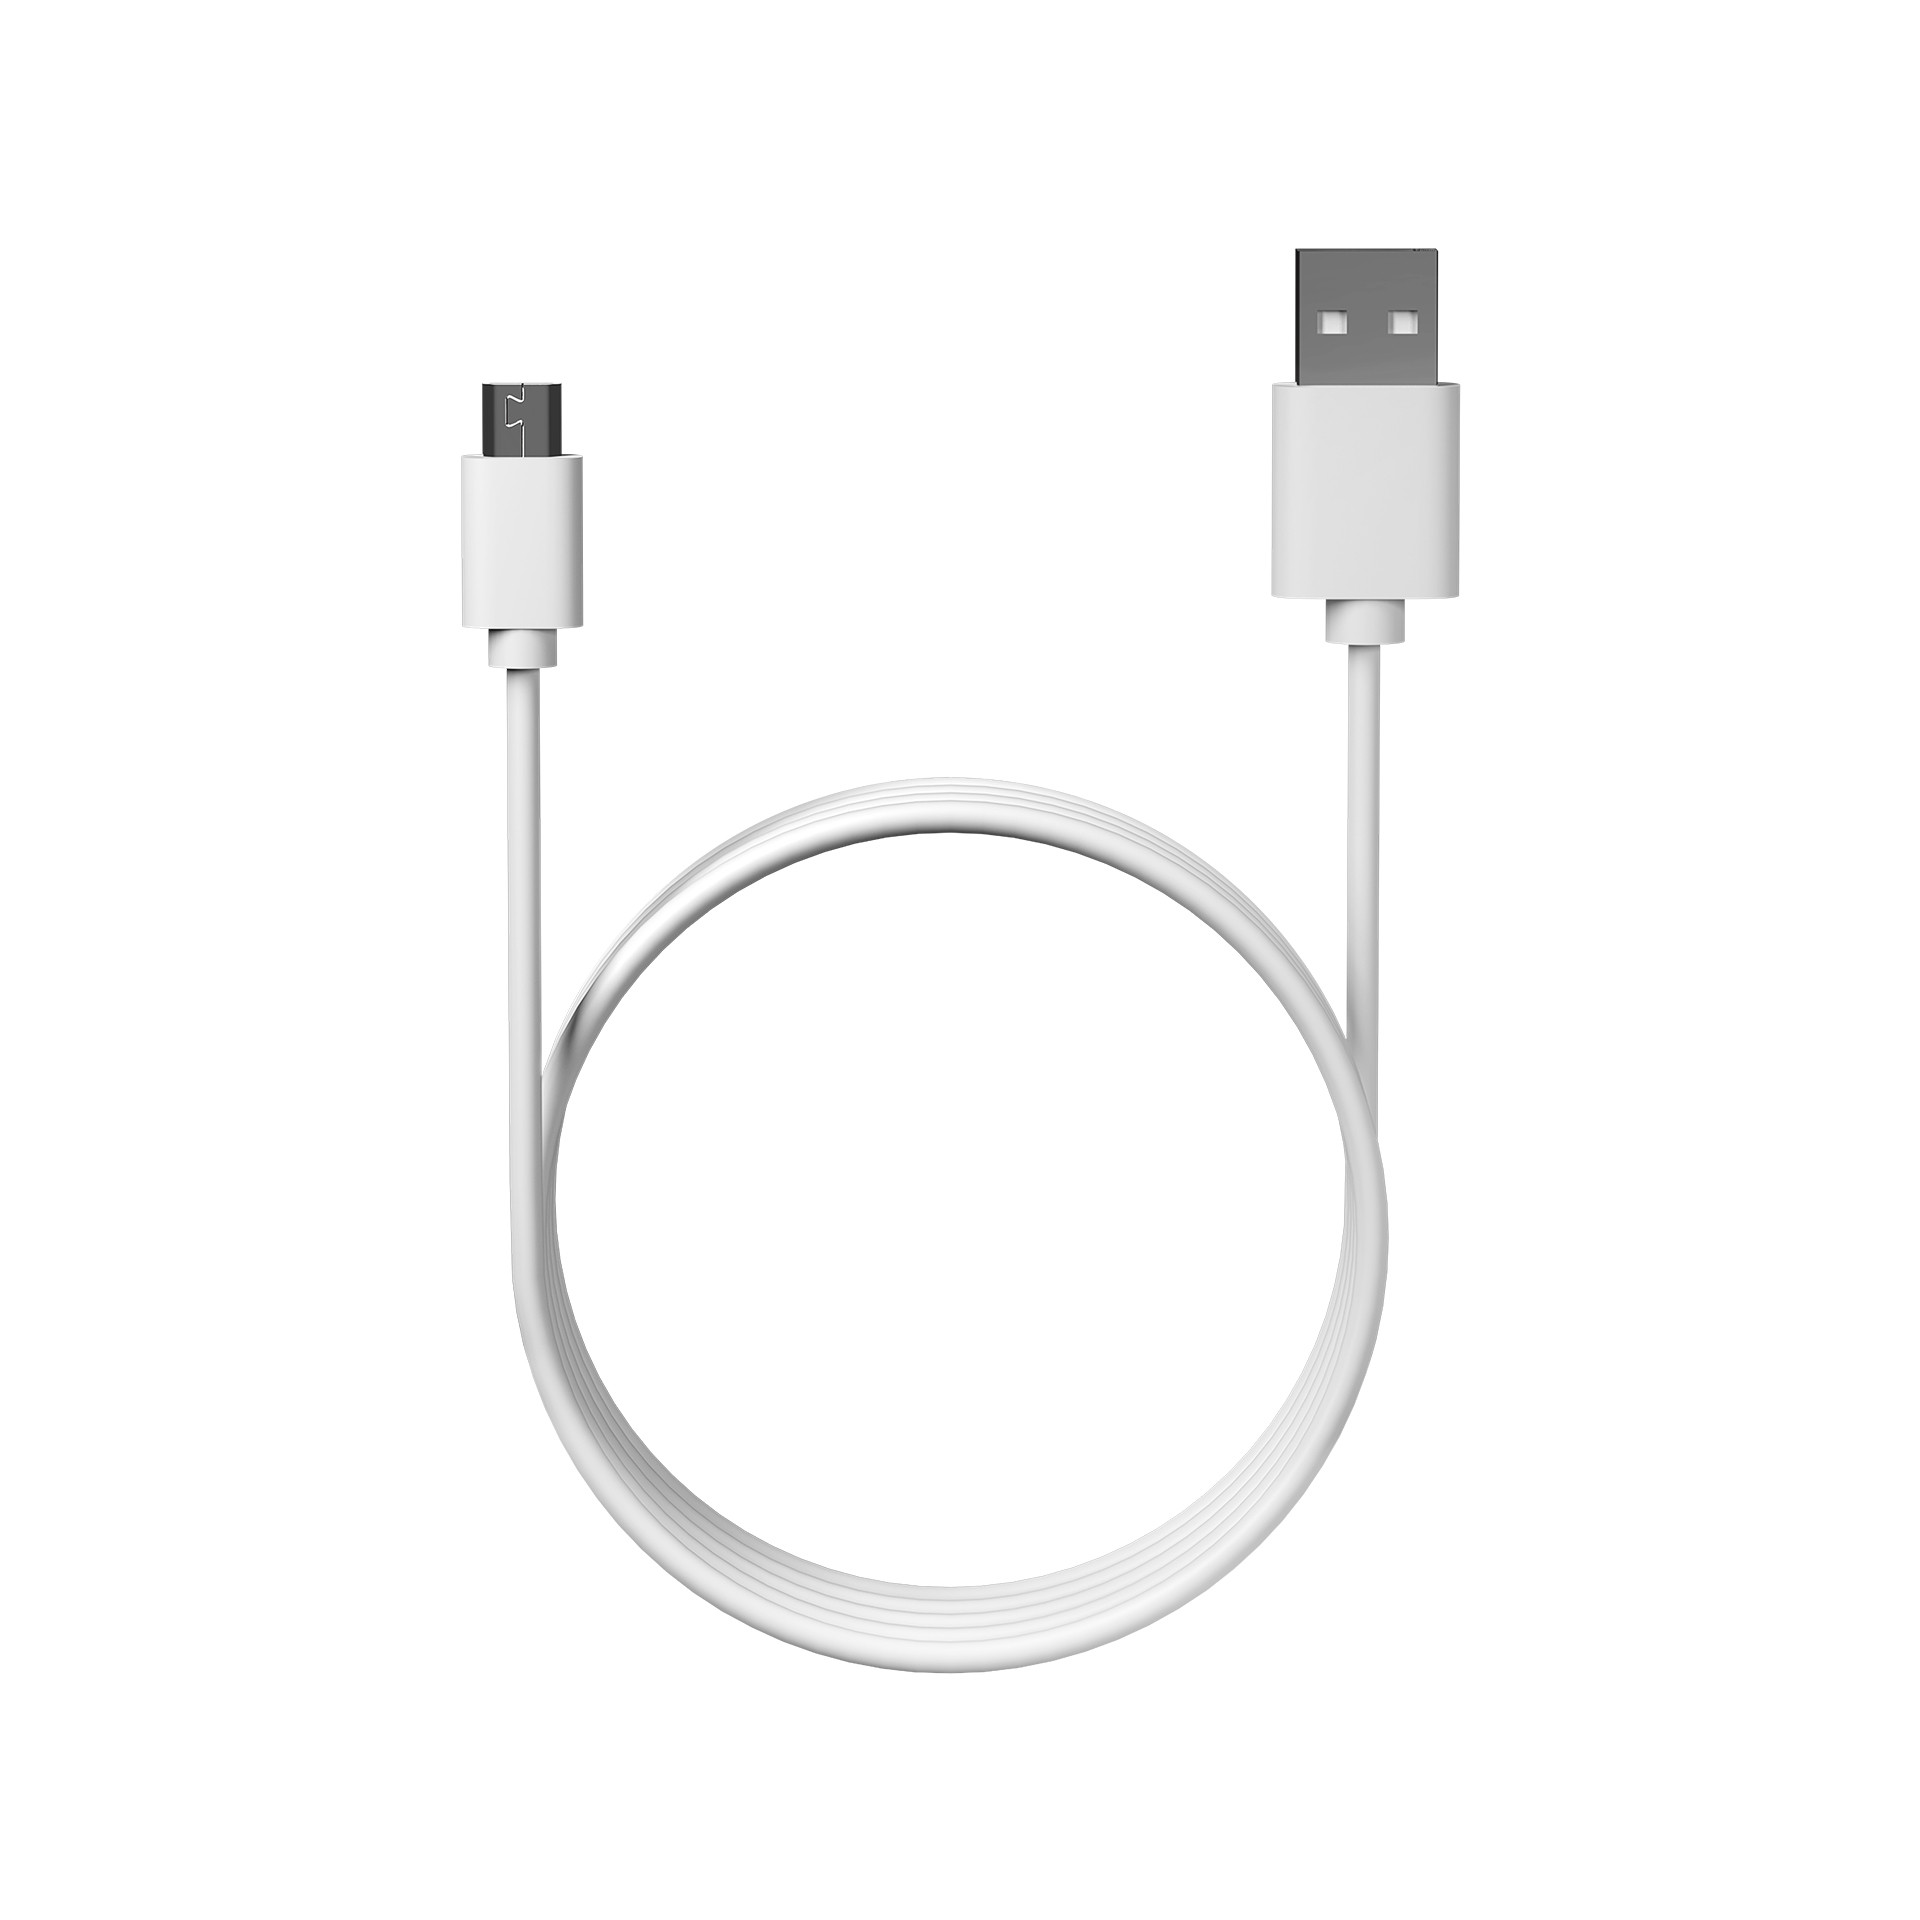 TrueLife Micro USB cable